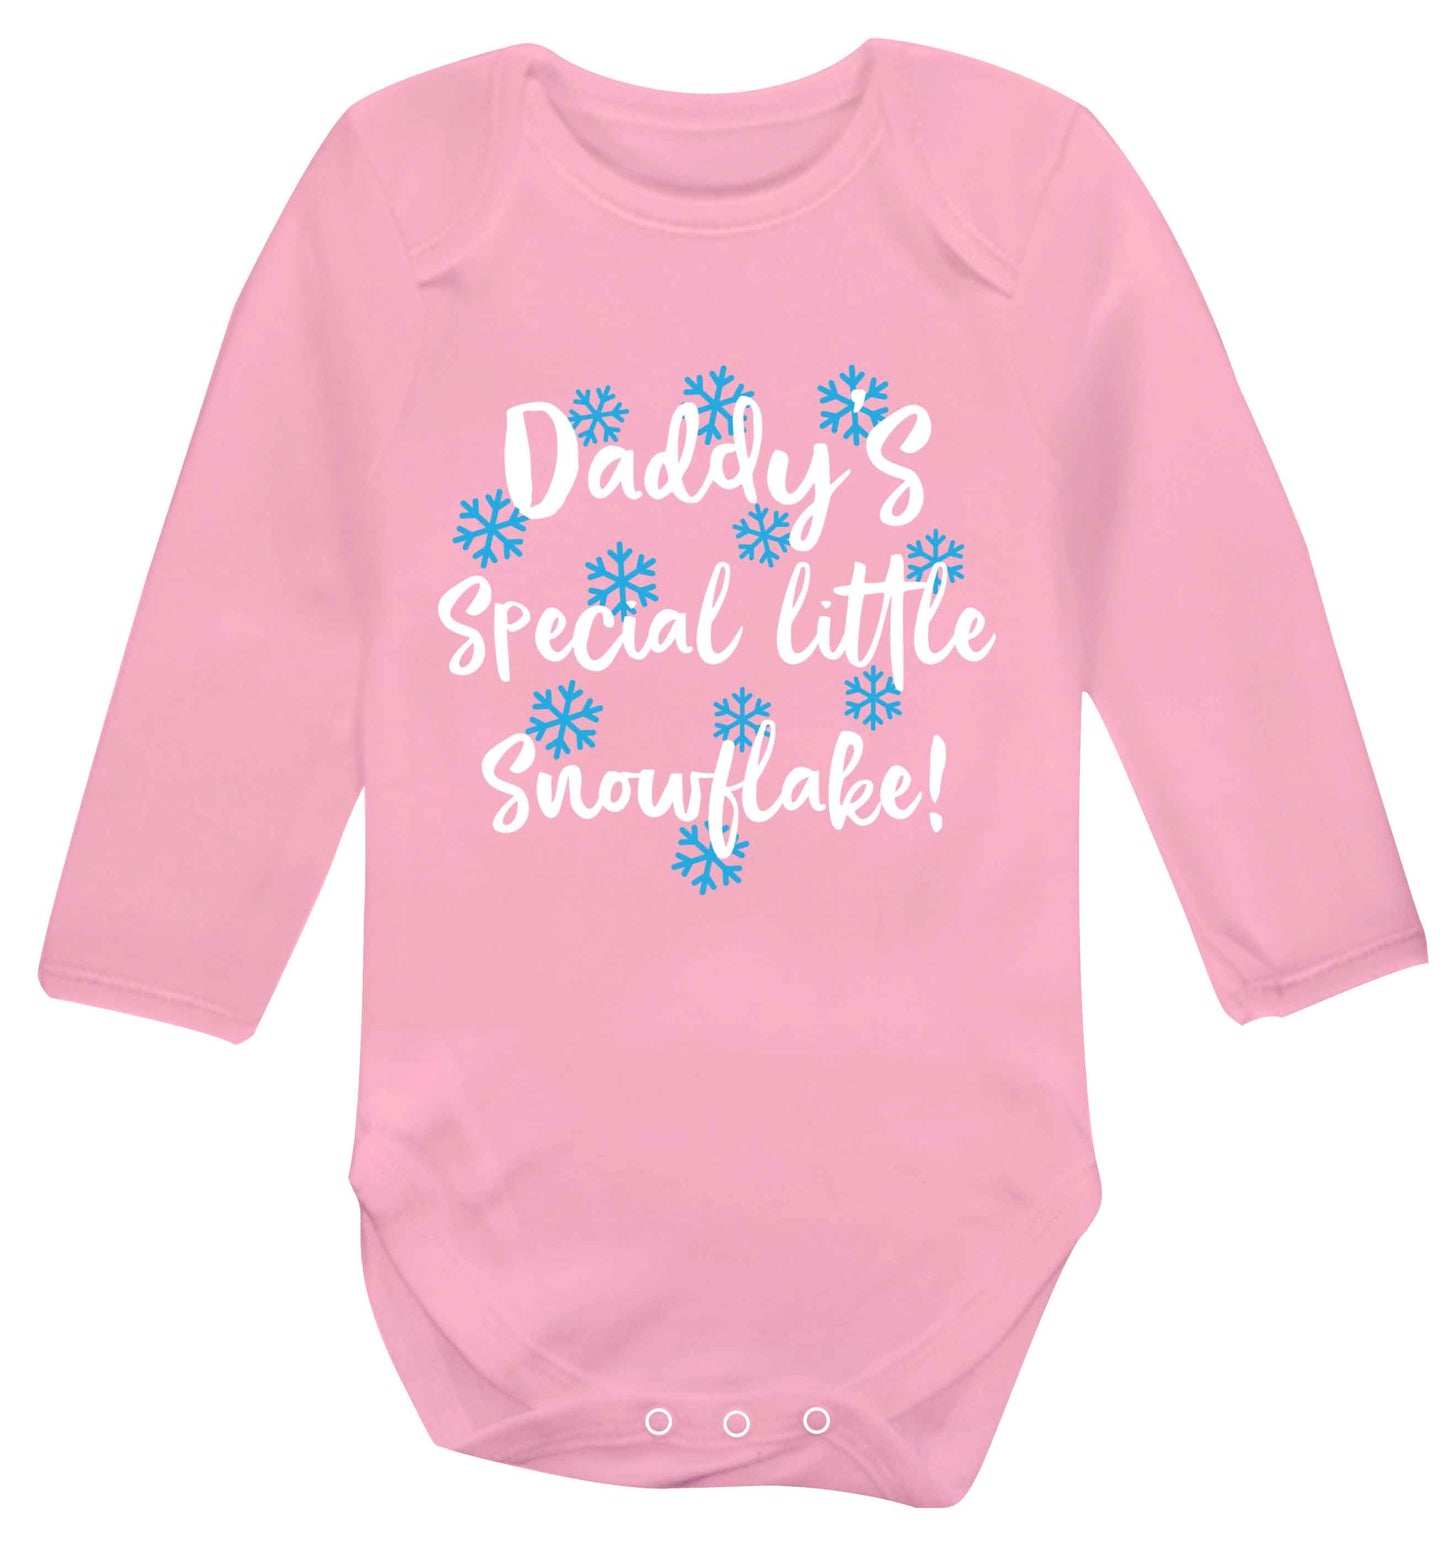 Daddy's special little snowflake Baby Vest long sleeved pale pink 6-12 months